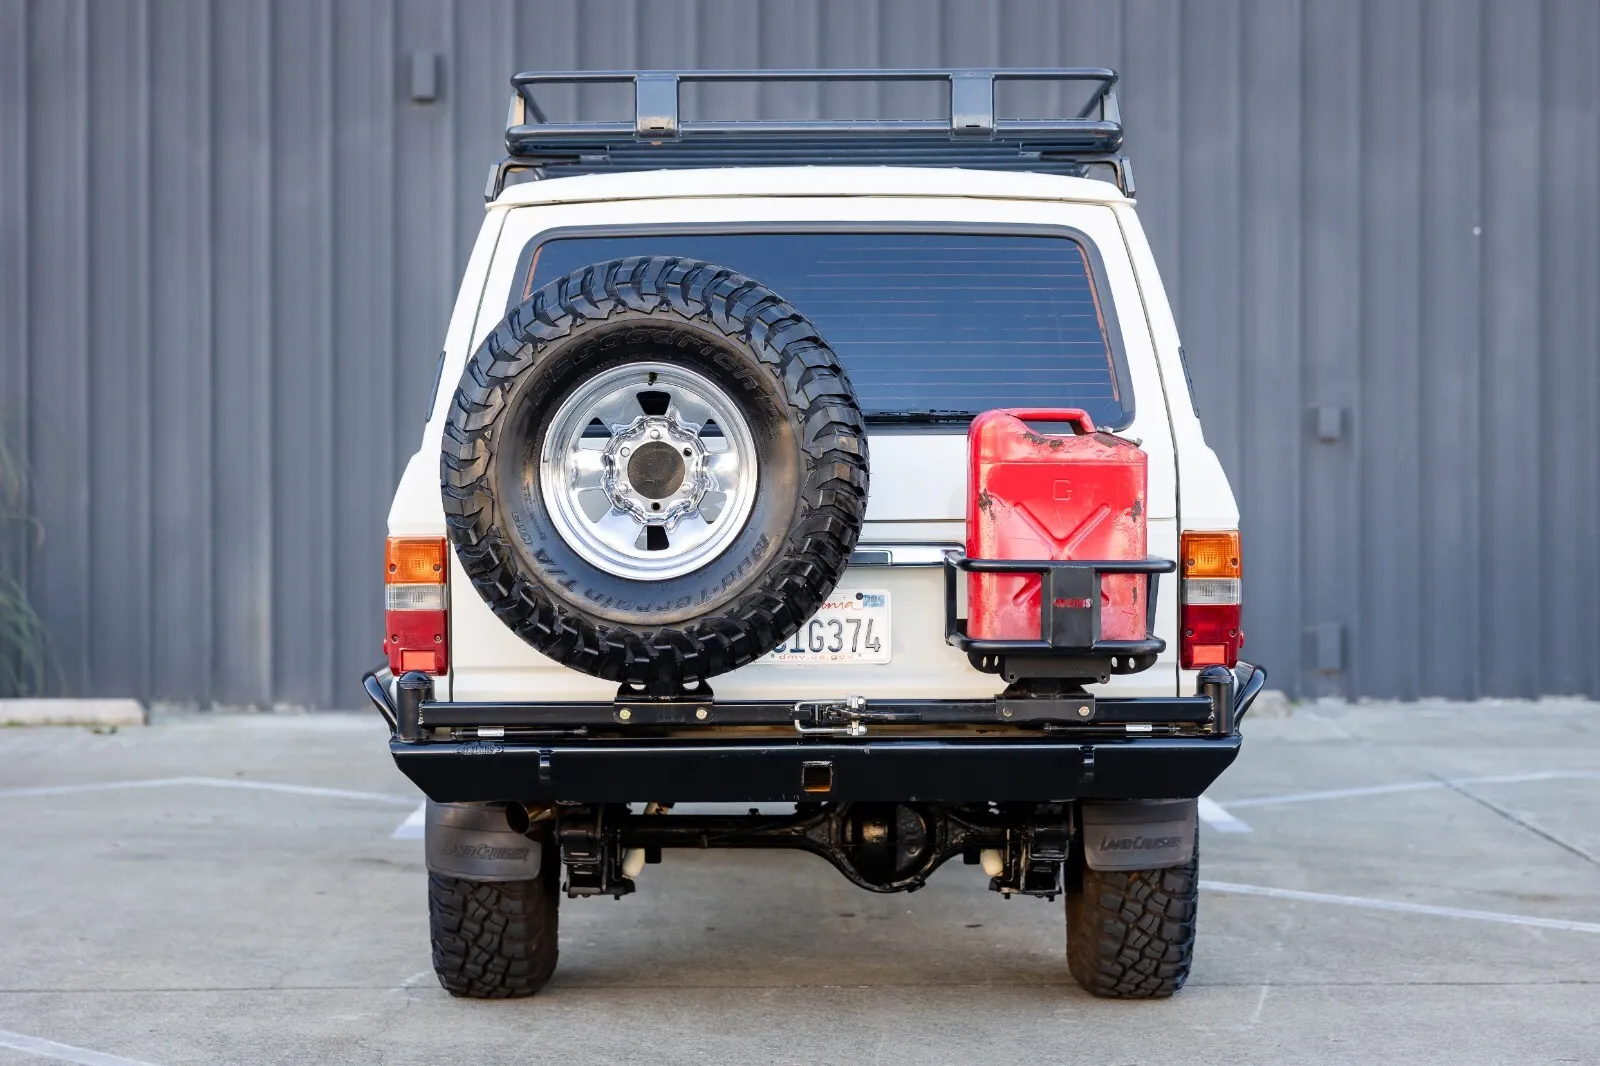 1986 Toyota Land Cruiser FJ60 offroad [well maintained]